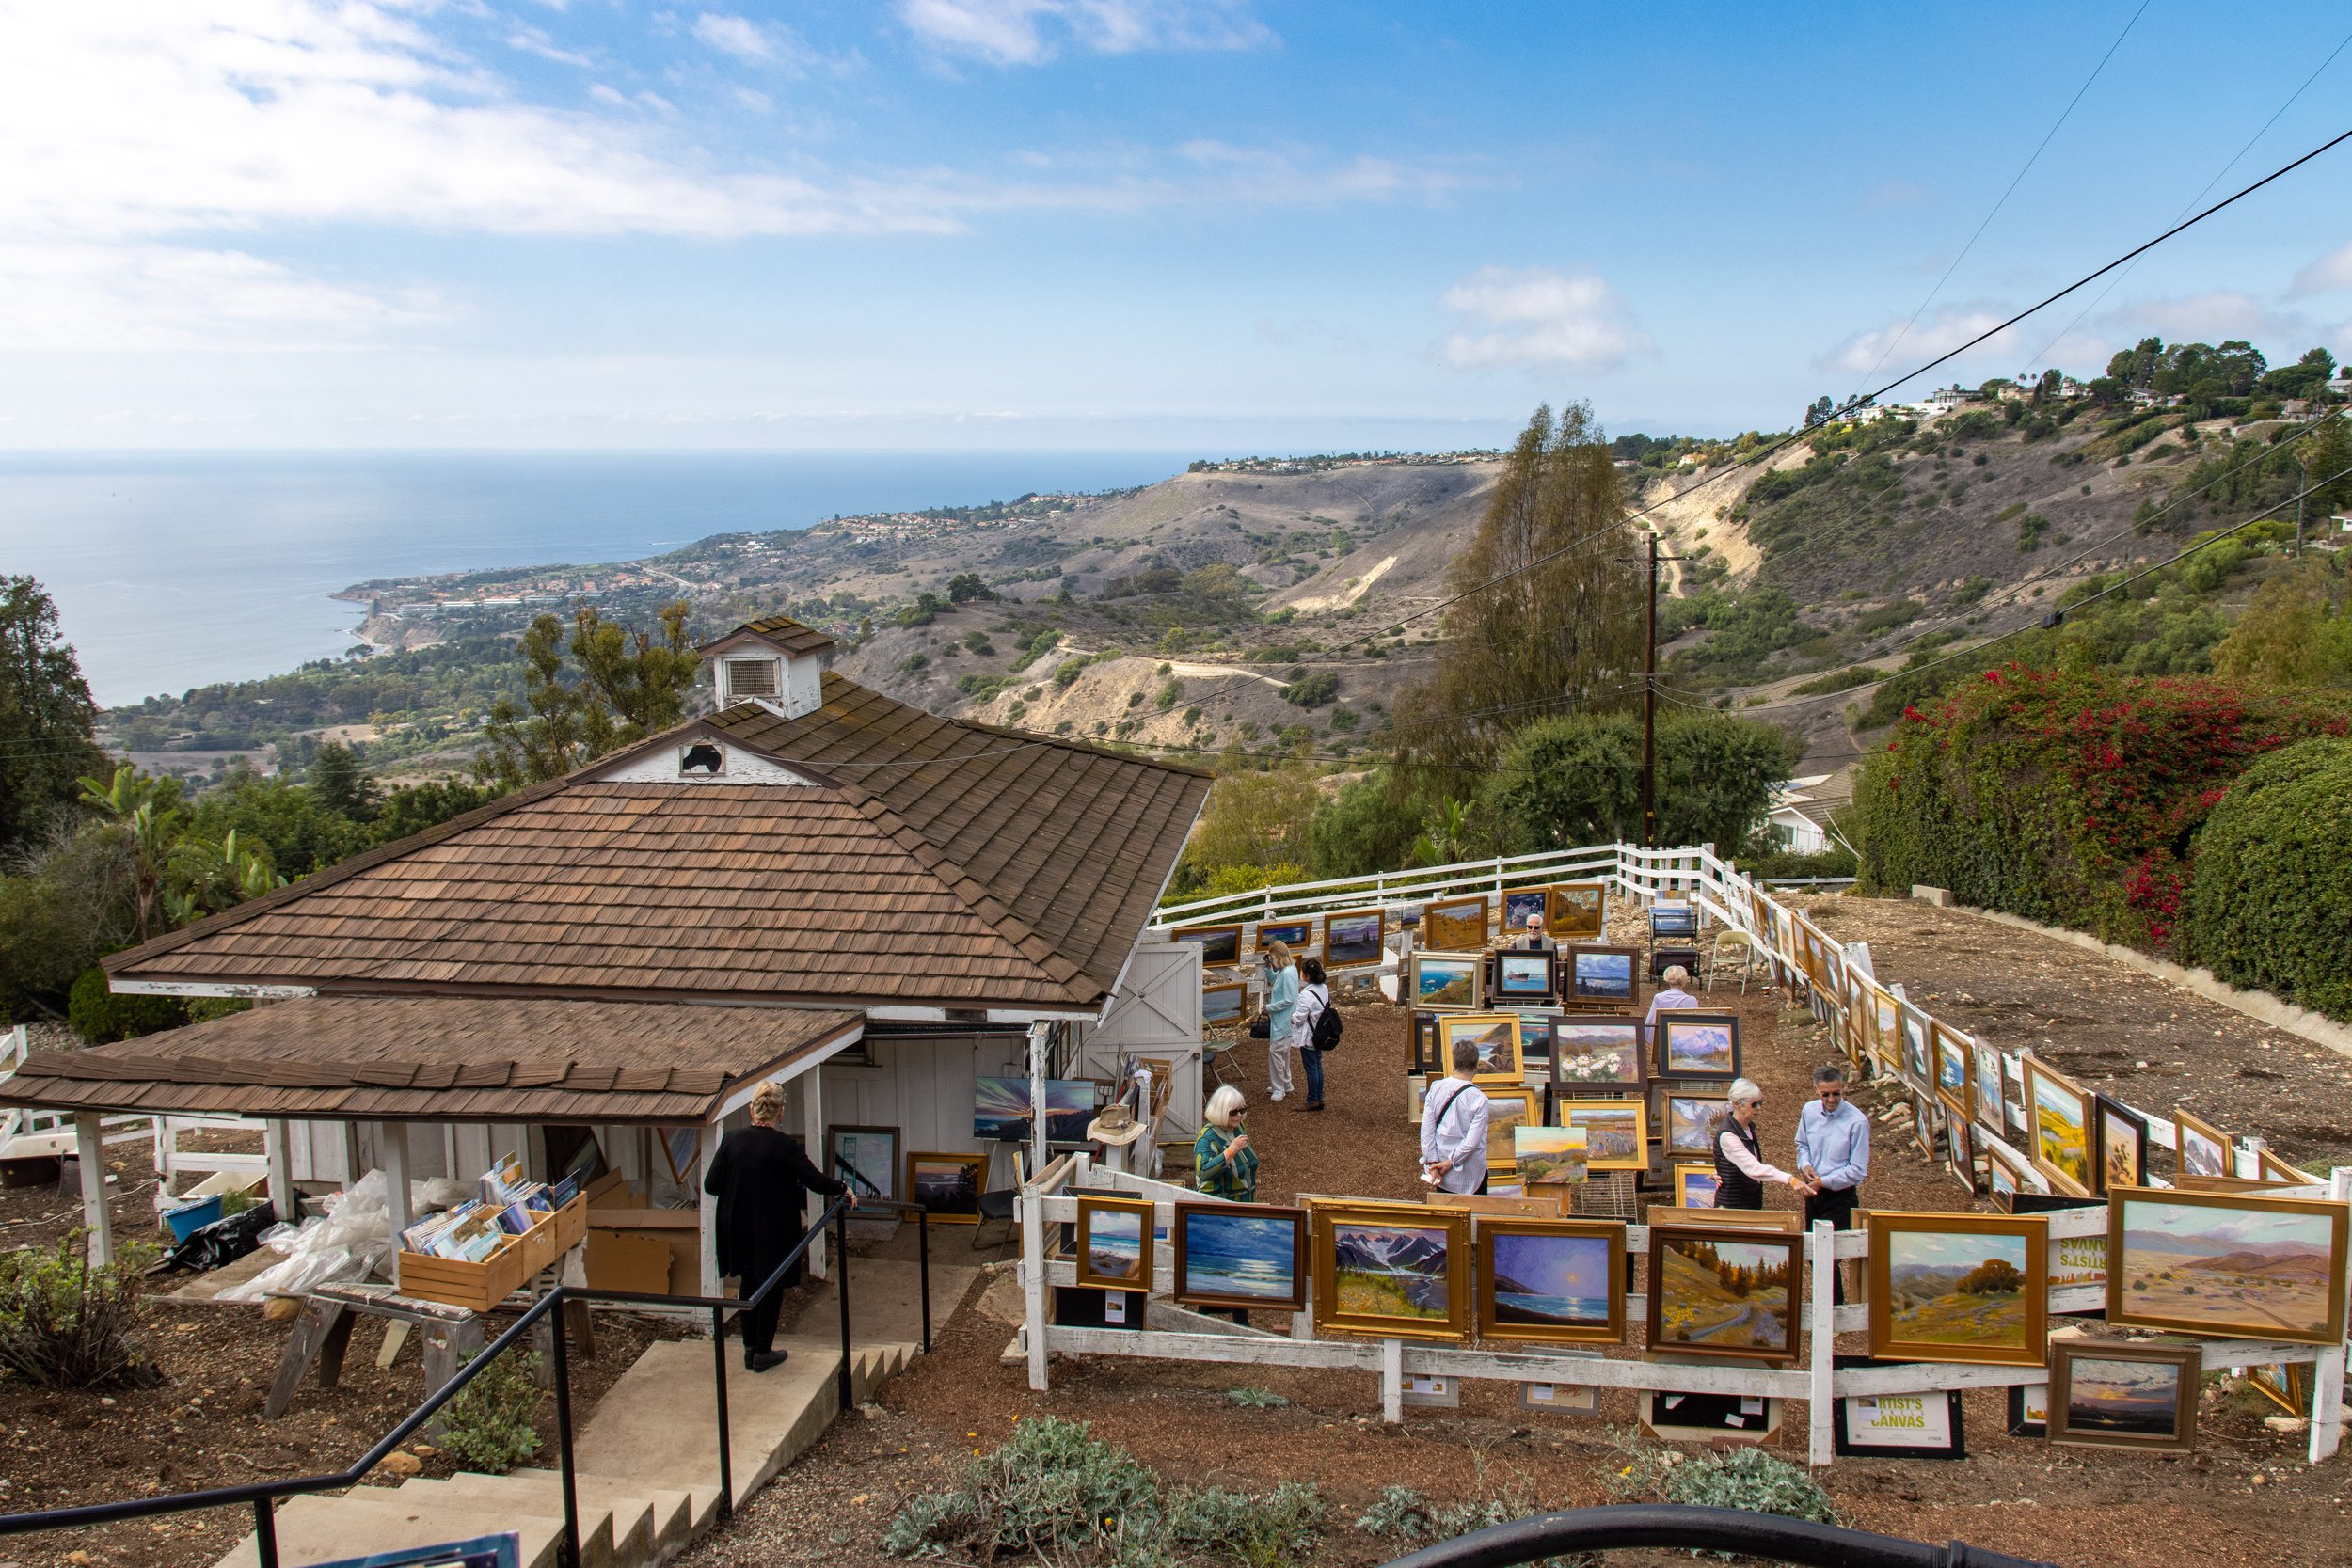 Don Crocker’s work on display at his home overlooking the Portuguese Bend Nature Reserve